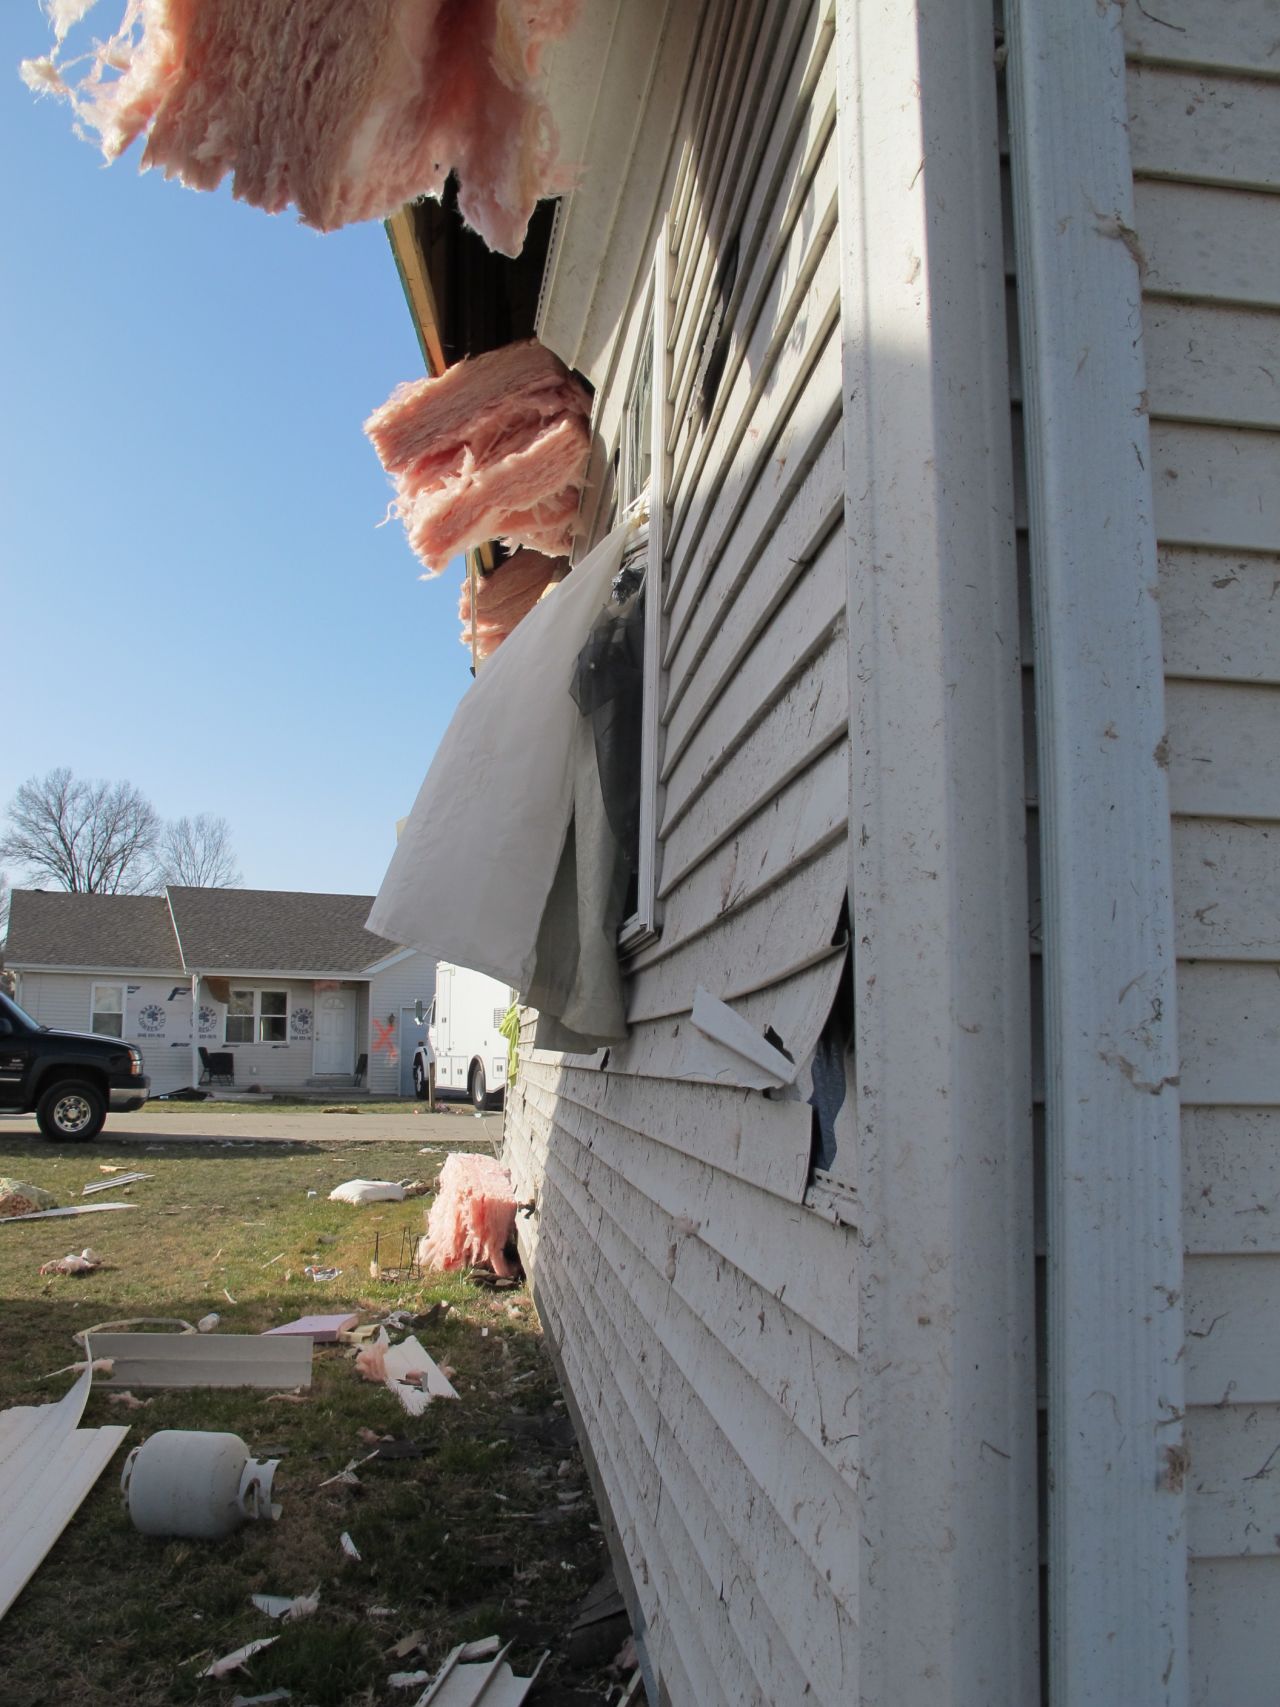 Up to 300 houses were damaged or destroyed in Harrisburg, authorities said. The tornado had a preliminary rating of EF4, the second most powerful on the rating scale, the National Weather Service said.